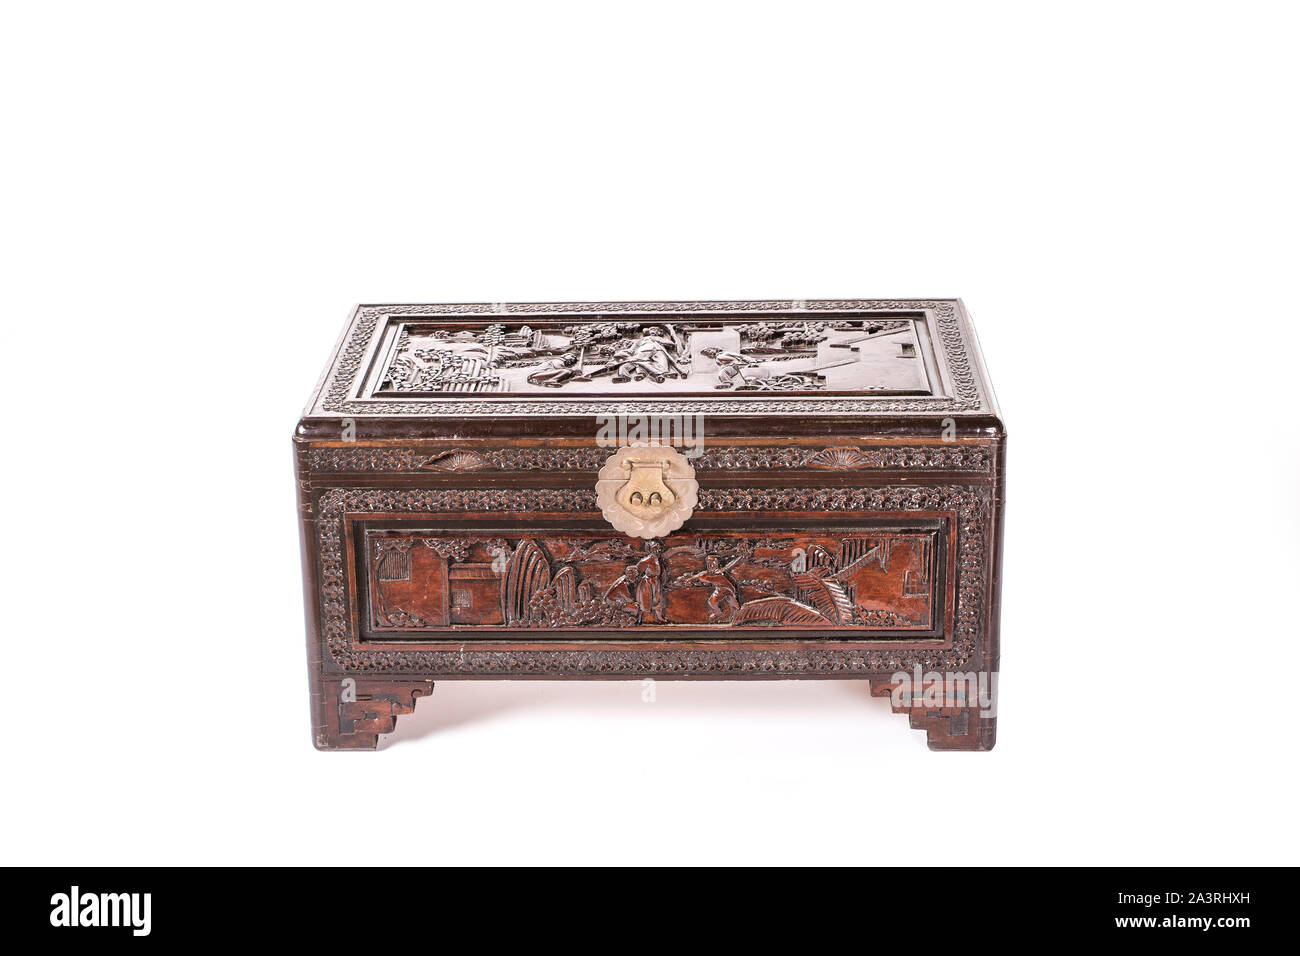 Old wooden chest with beautiful and rich carving decoration in in Chinese style. France Stock Photo